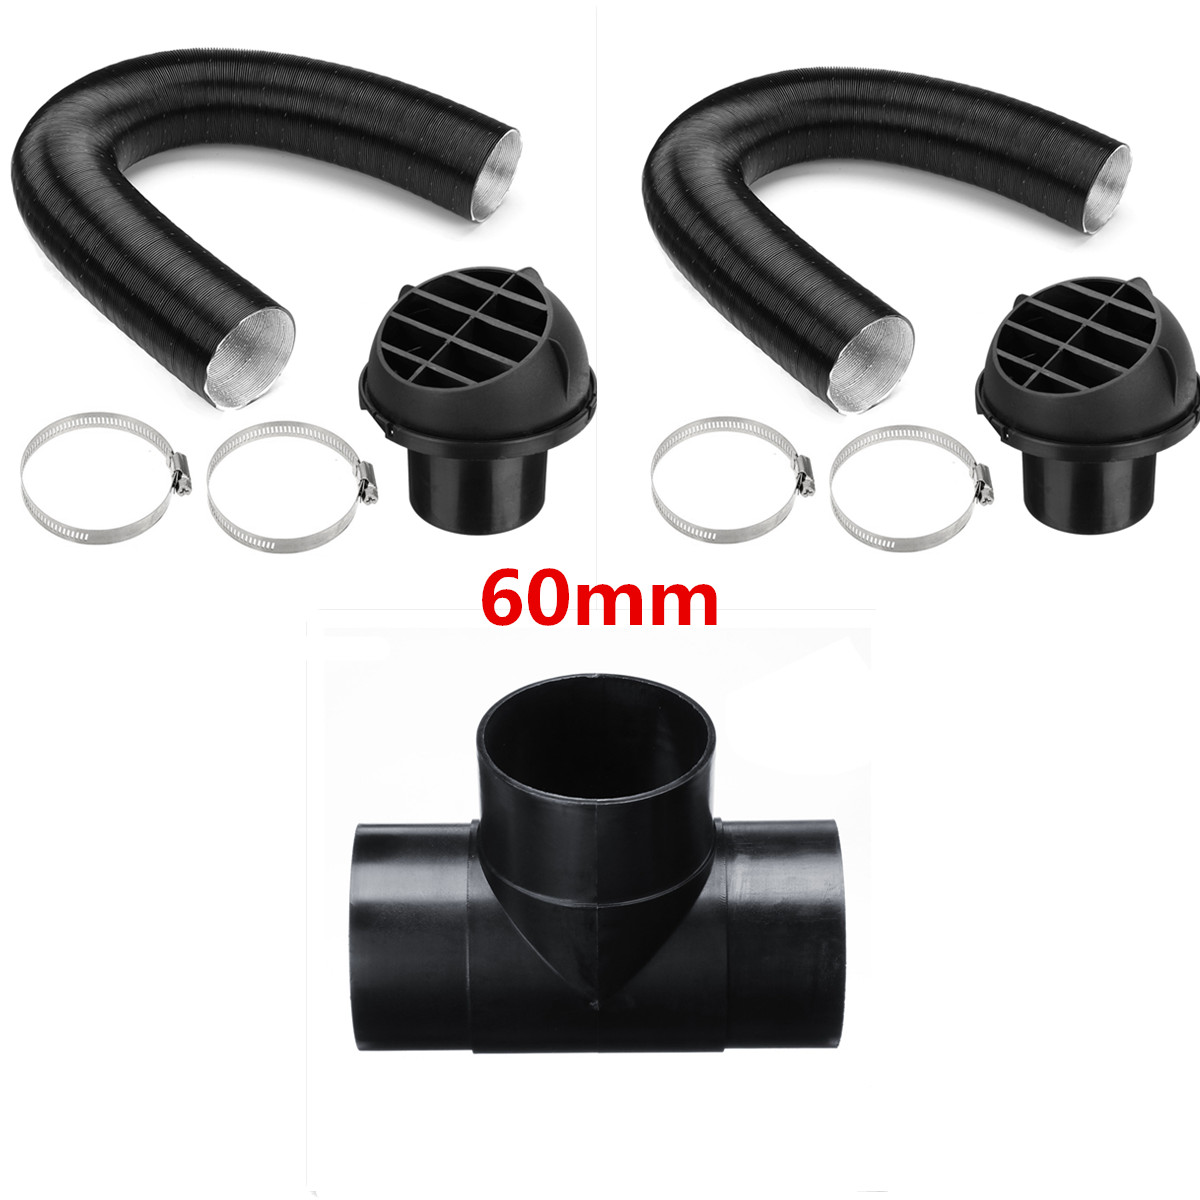 60mm-Heater-Pipe-Ducting-T-Piece-Warm-Air-Outlet-Vent-Hose-Clips-For-Parking-Diesel-Heater-1465123-1